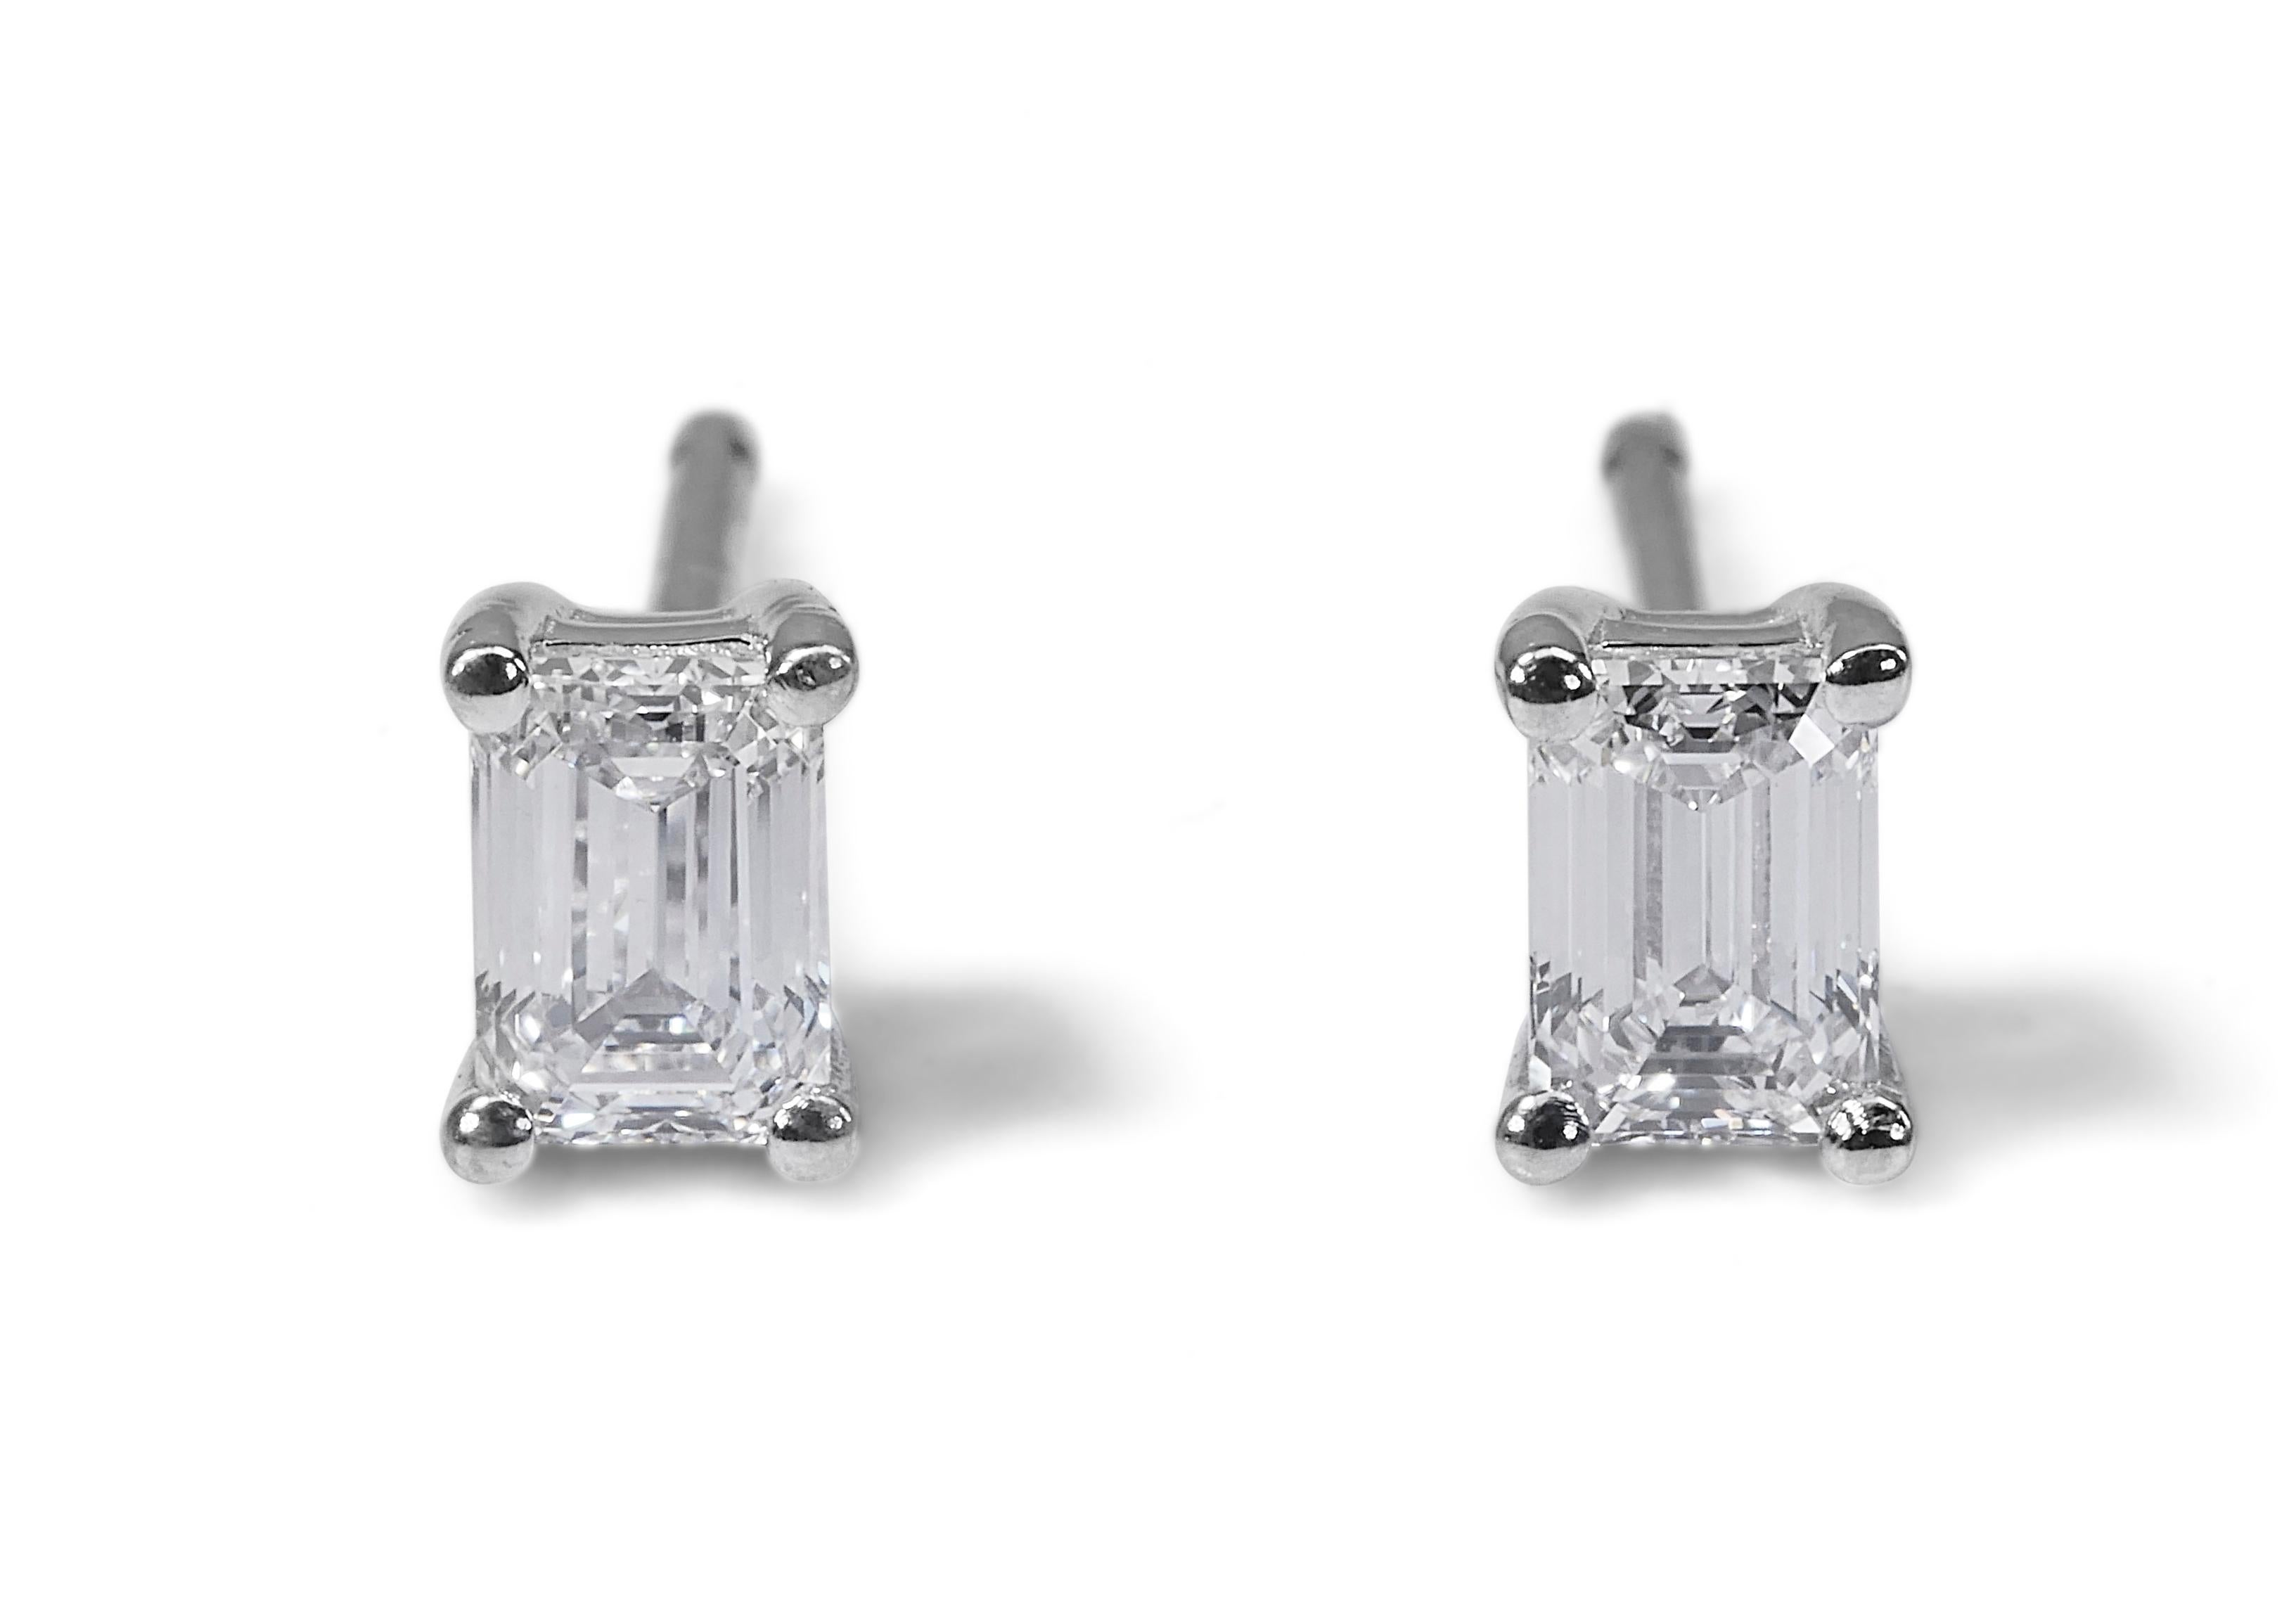 Timeless 2.02ct Diamond Stud Earrings in 18k White Gold - GIA Certified For Sale 4